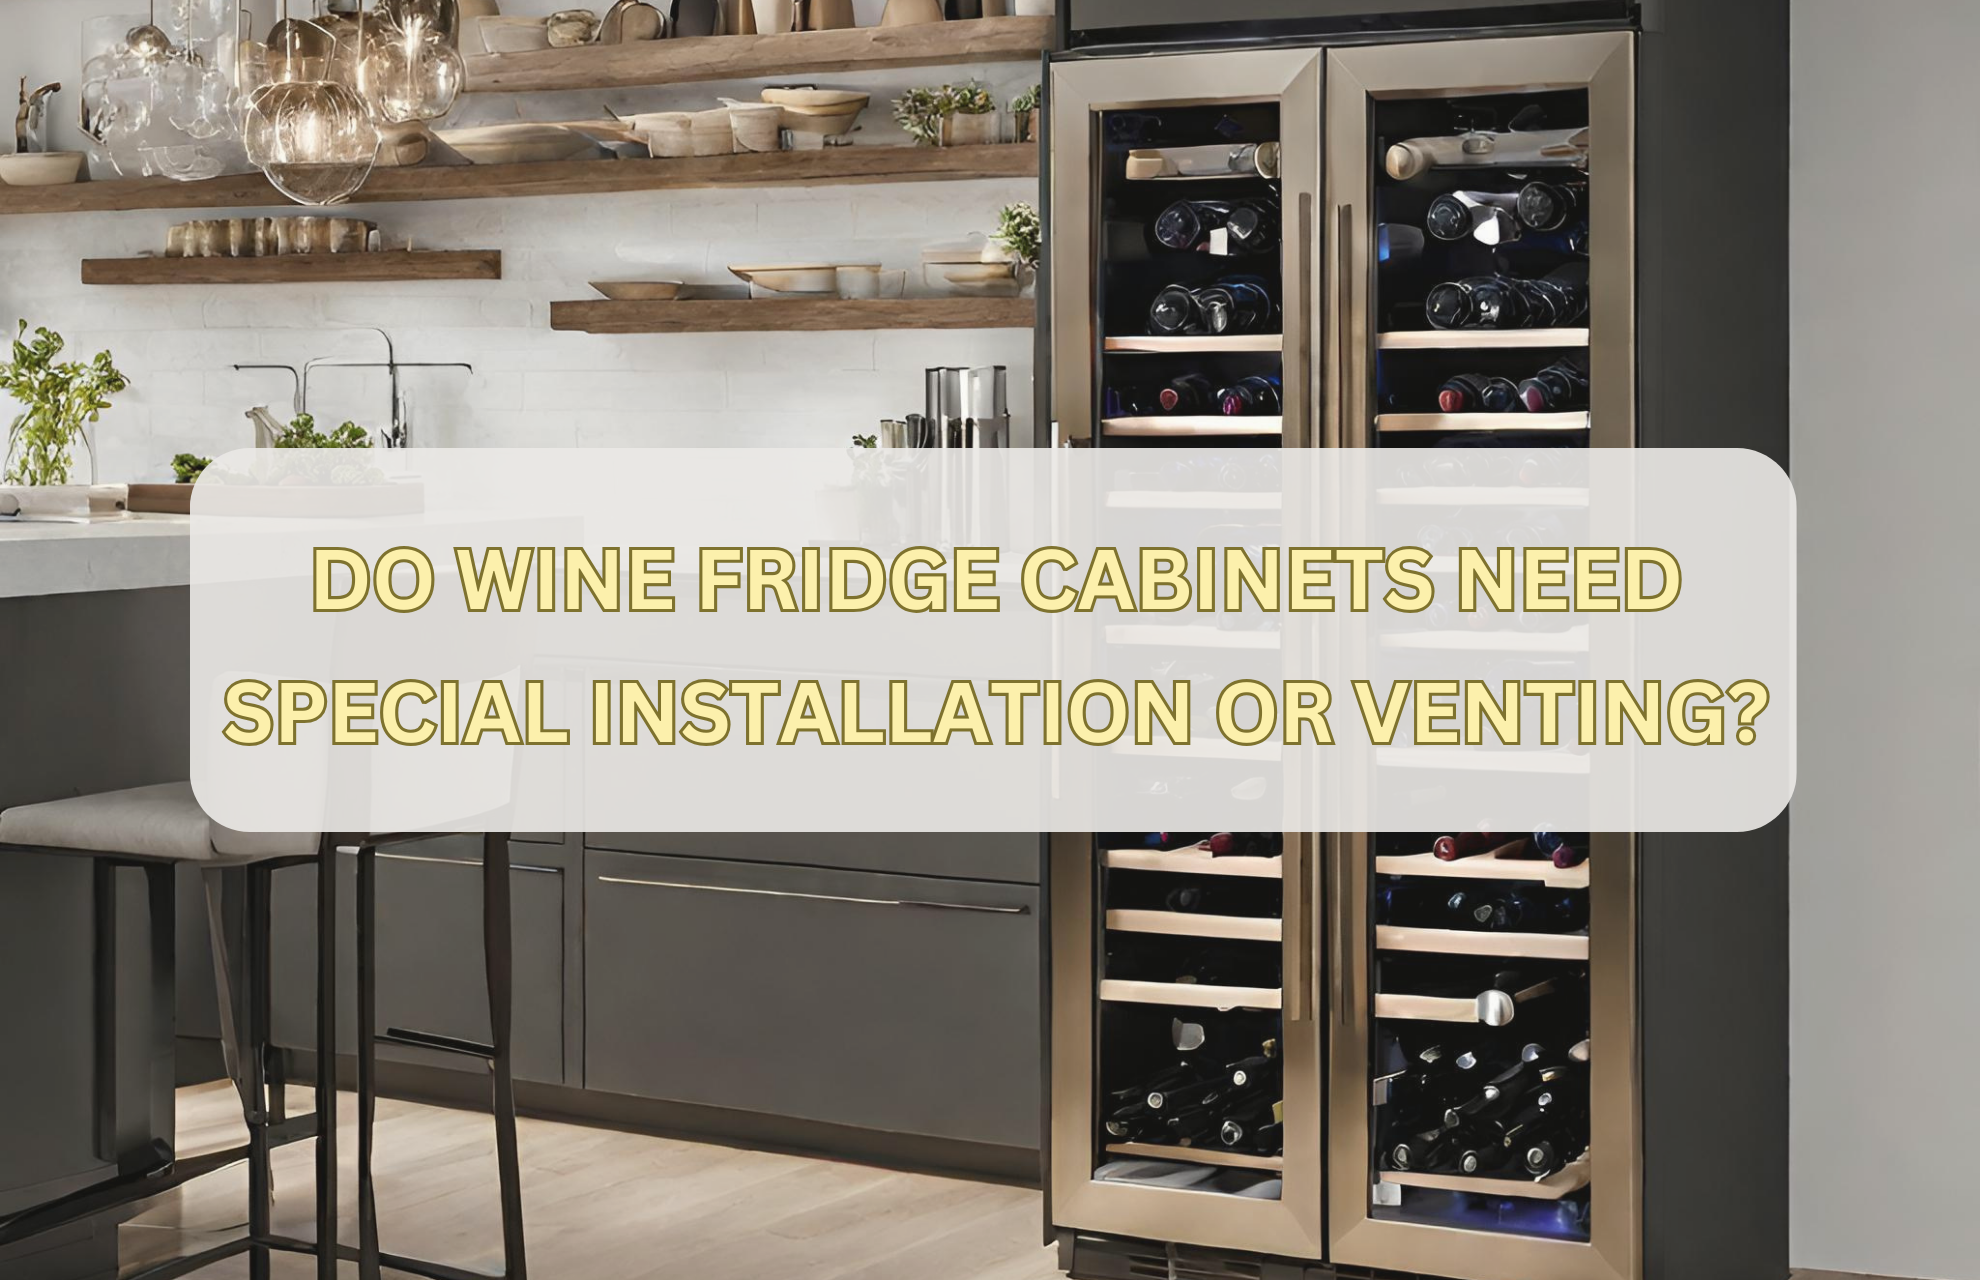 DO WINE FRIDGE CABINETS NEED SPECIAL INSTALLATION OR VENTING